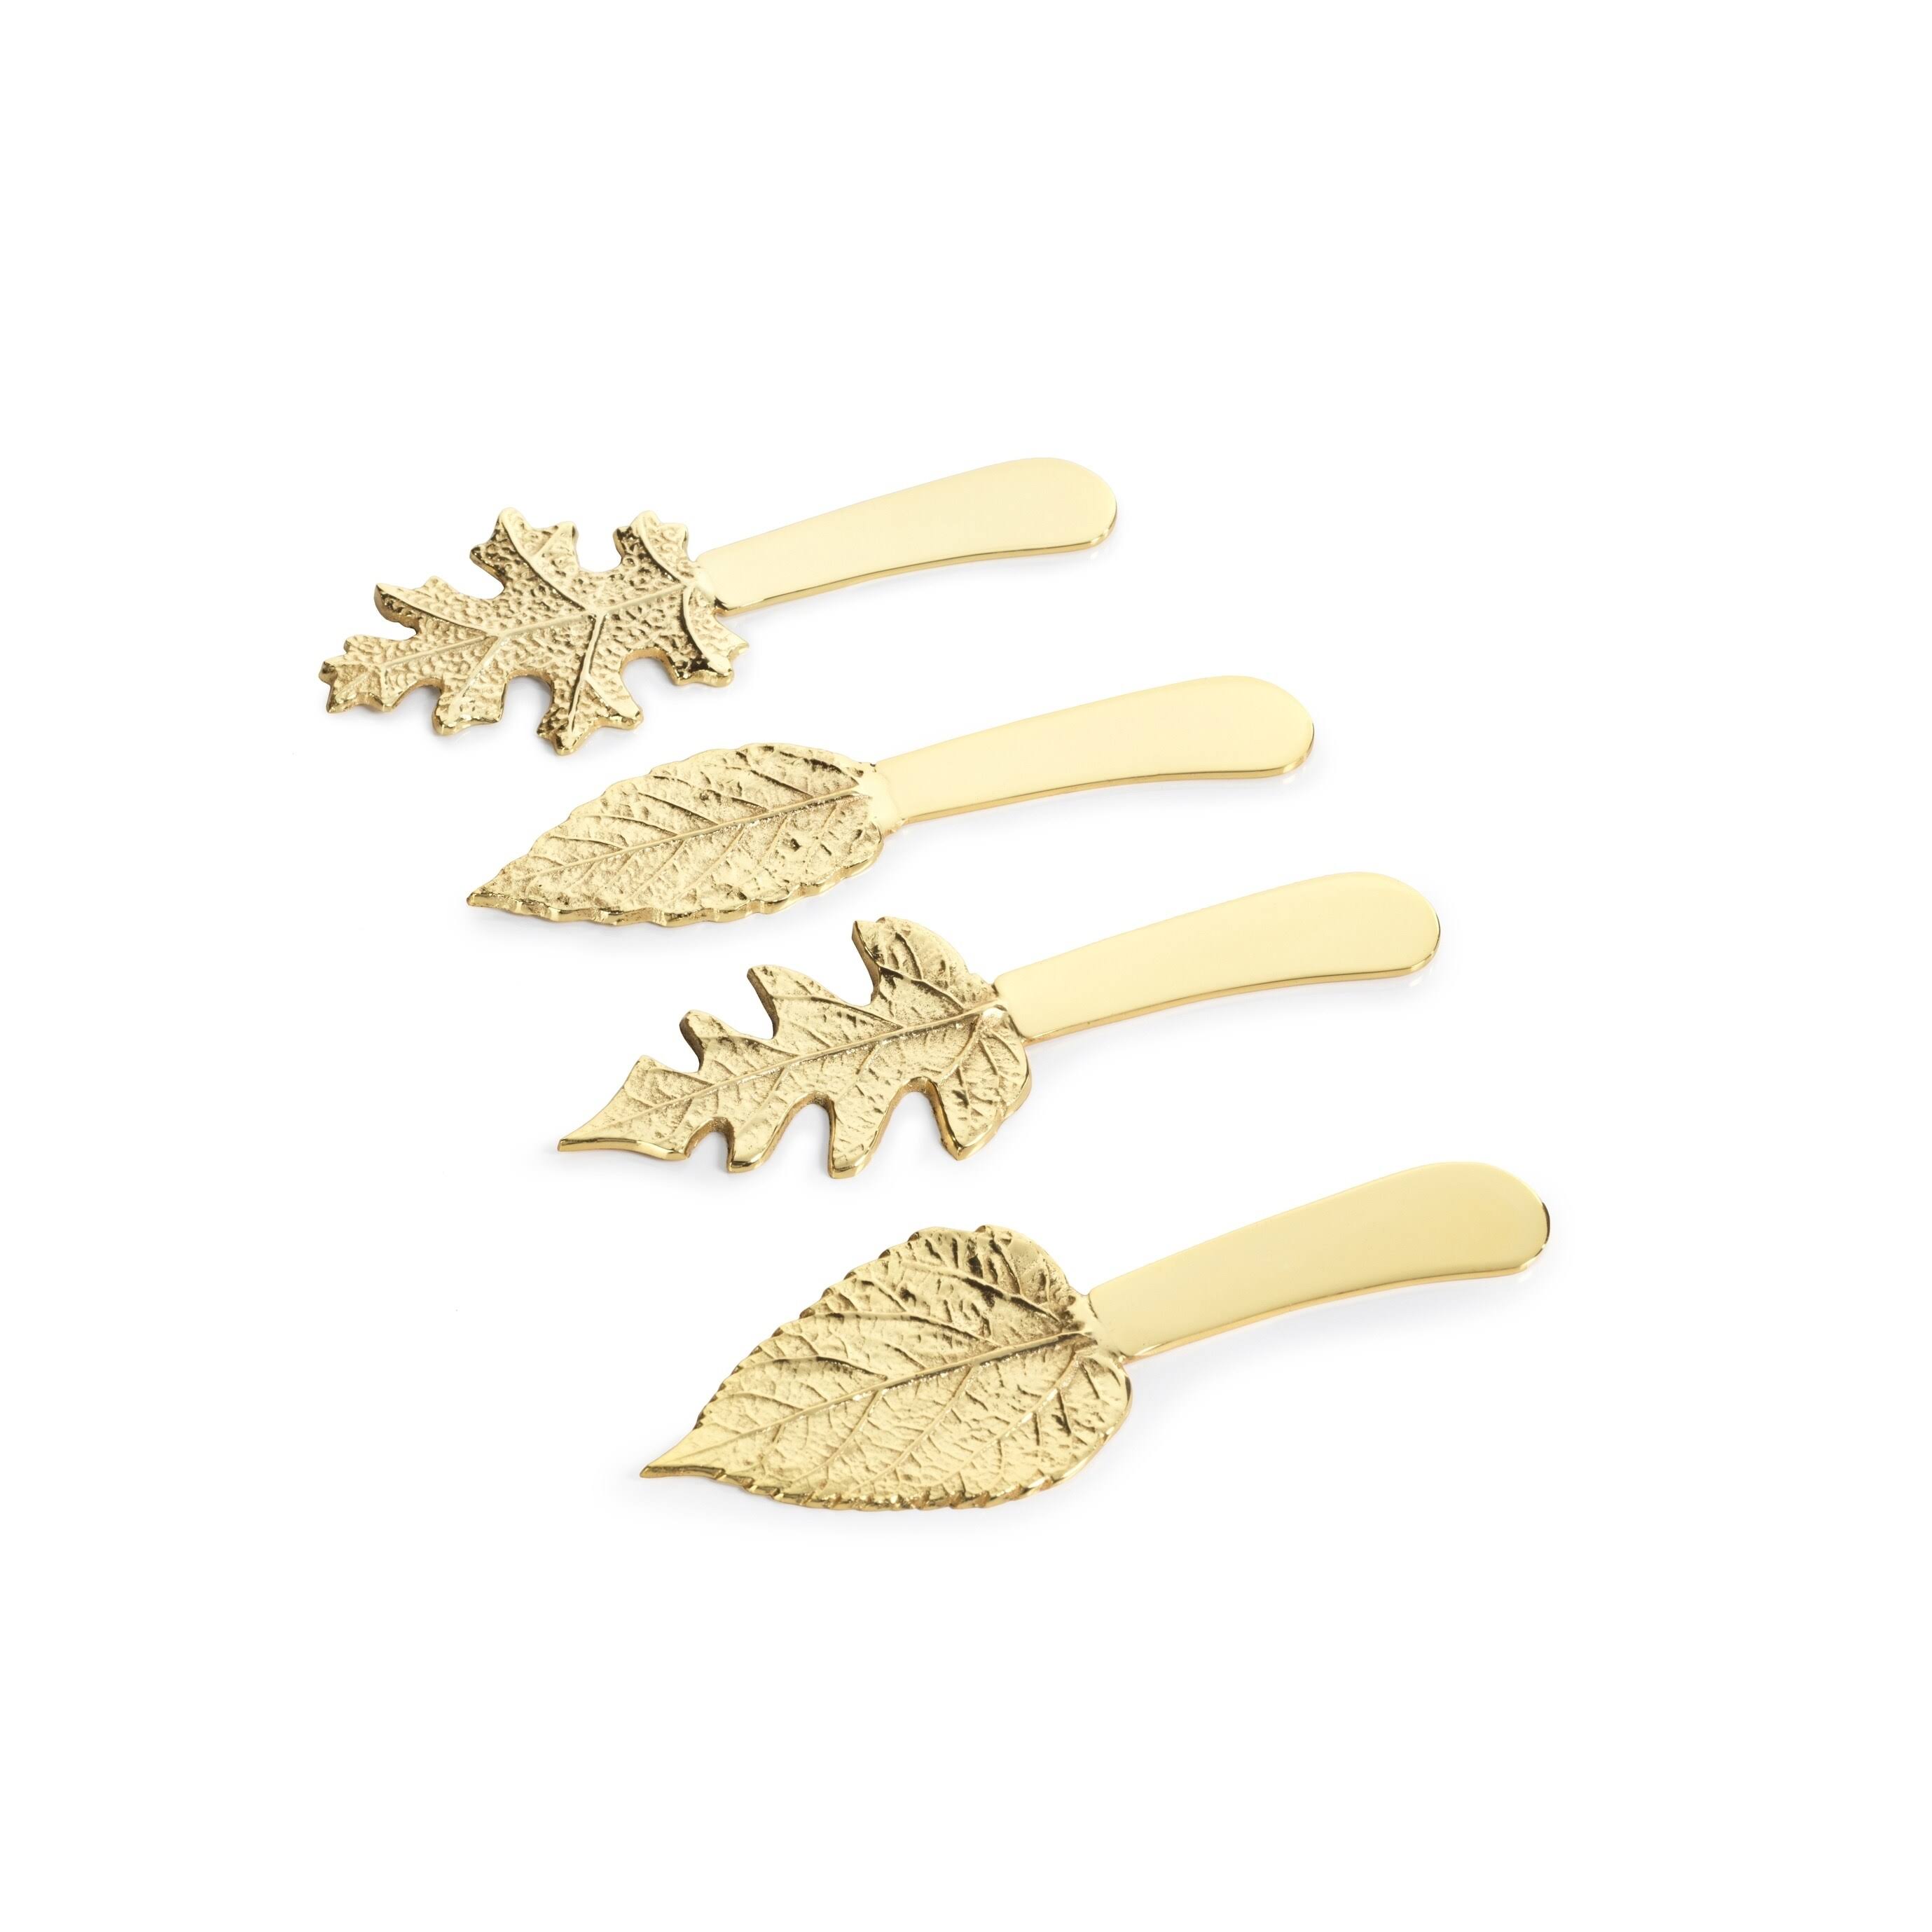 Zodax Stainless Steel Cheese Spreader Set - Gold Leaf, 4pcs